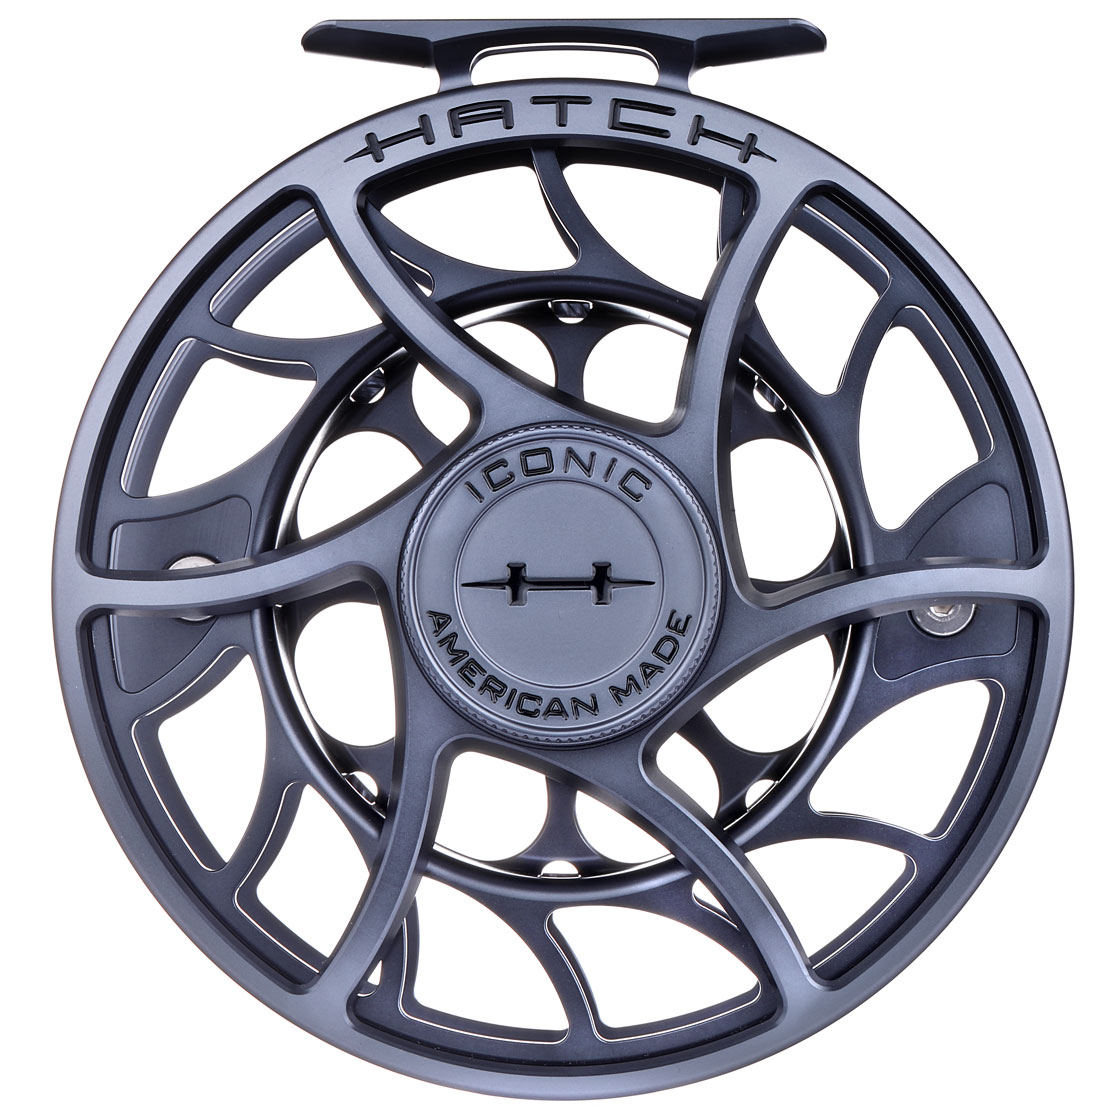 Hatch Iconic Fly Reel Large Arbor gray/black, Reels, Fly Reels